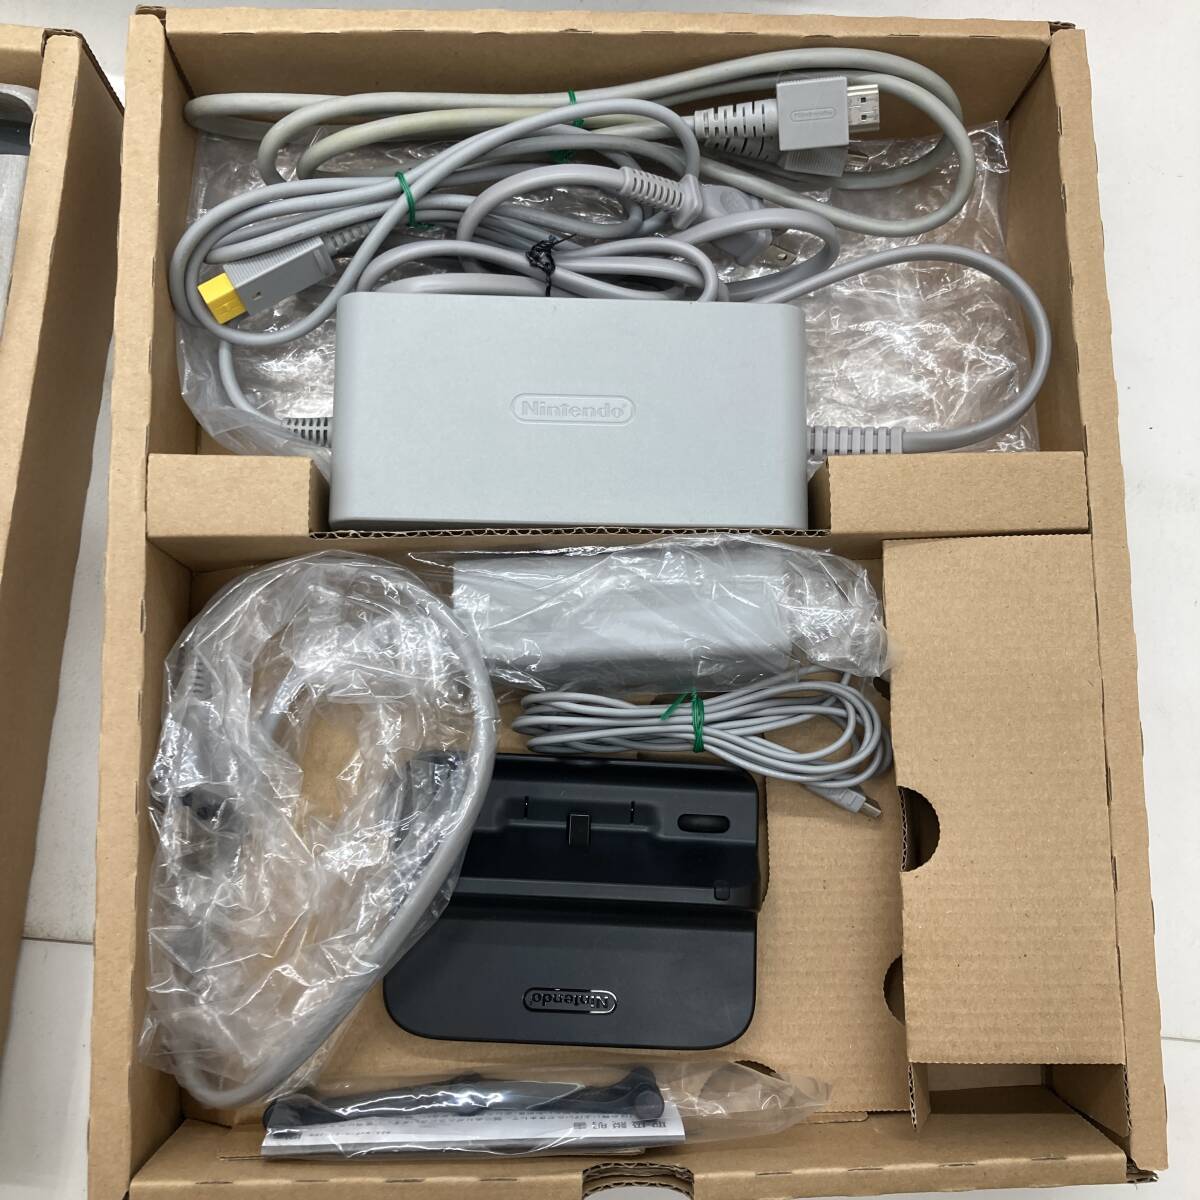 [1 jpy ~] Nintendo Wii U Family premium set 32GB Kuro game the first period ./ operation verification settled * lack of equipped [ secondhand goods ]